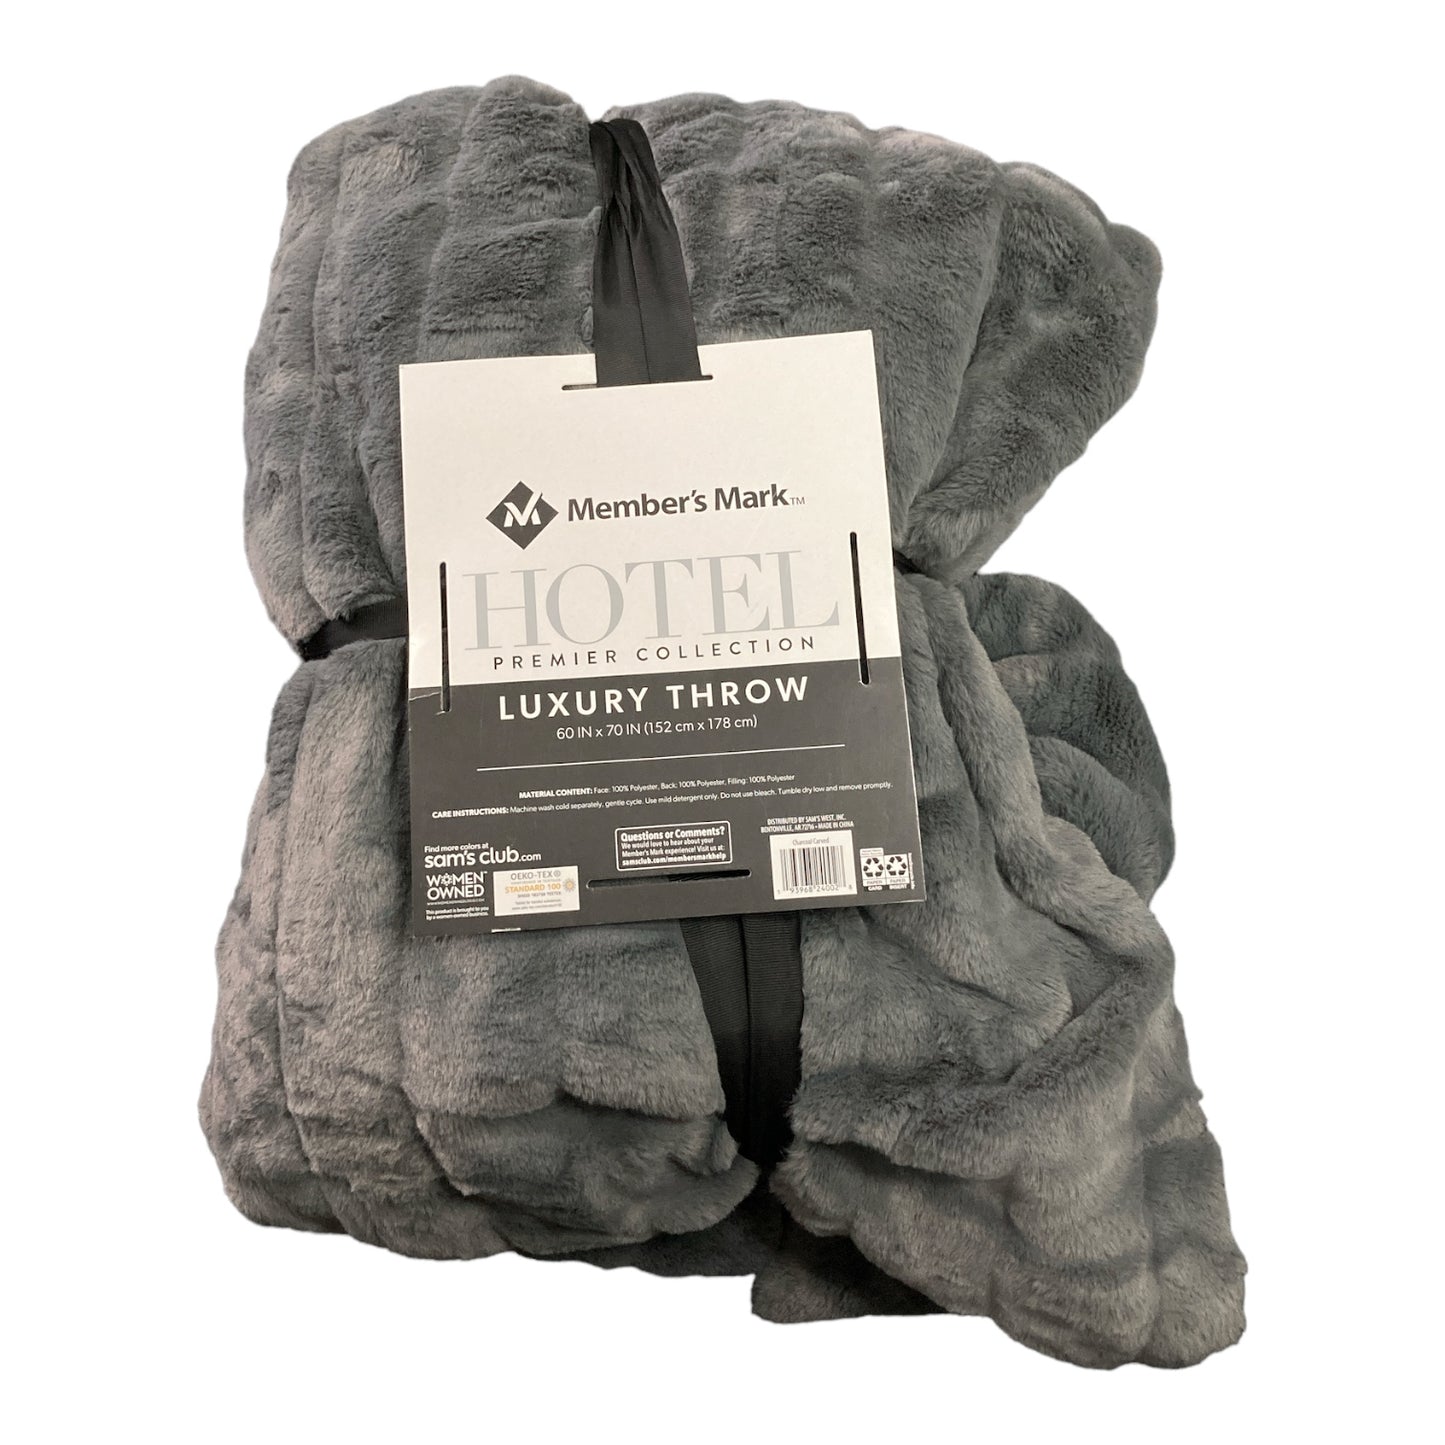 Member's Mark Hotel Premier Collection Luxury Throw, 60" x 70", Charcoal Carved